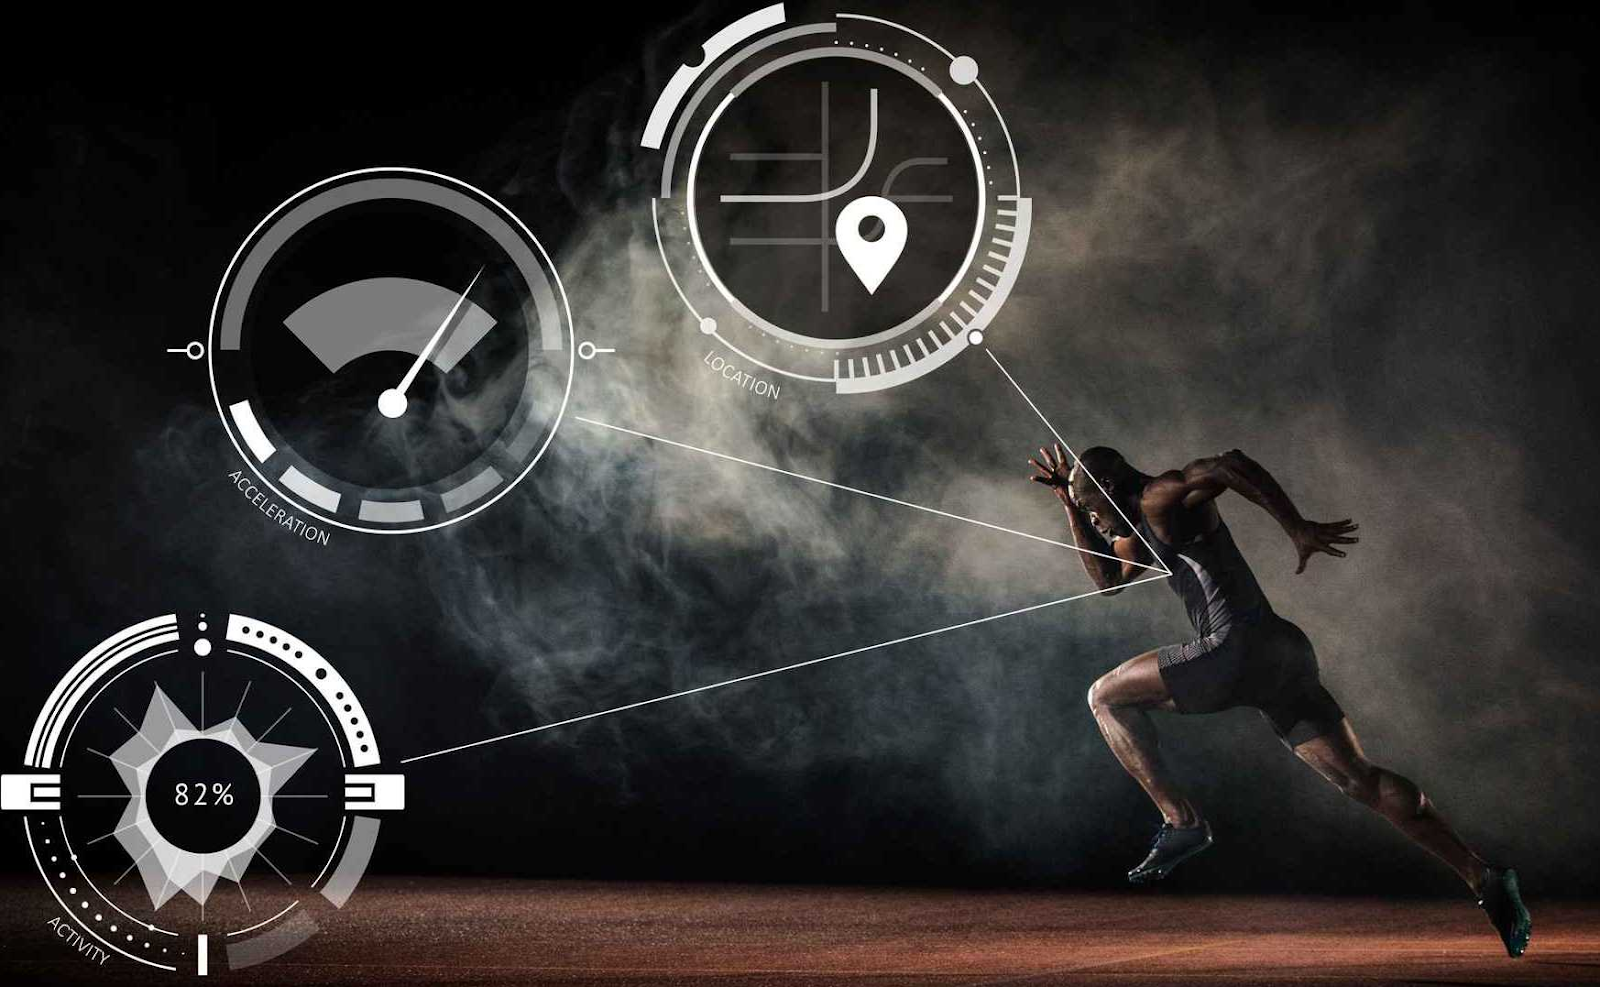 athlete training;
physical activity detectors that show data 